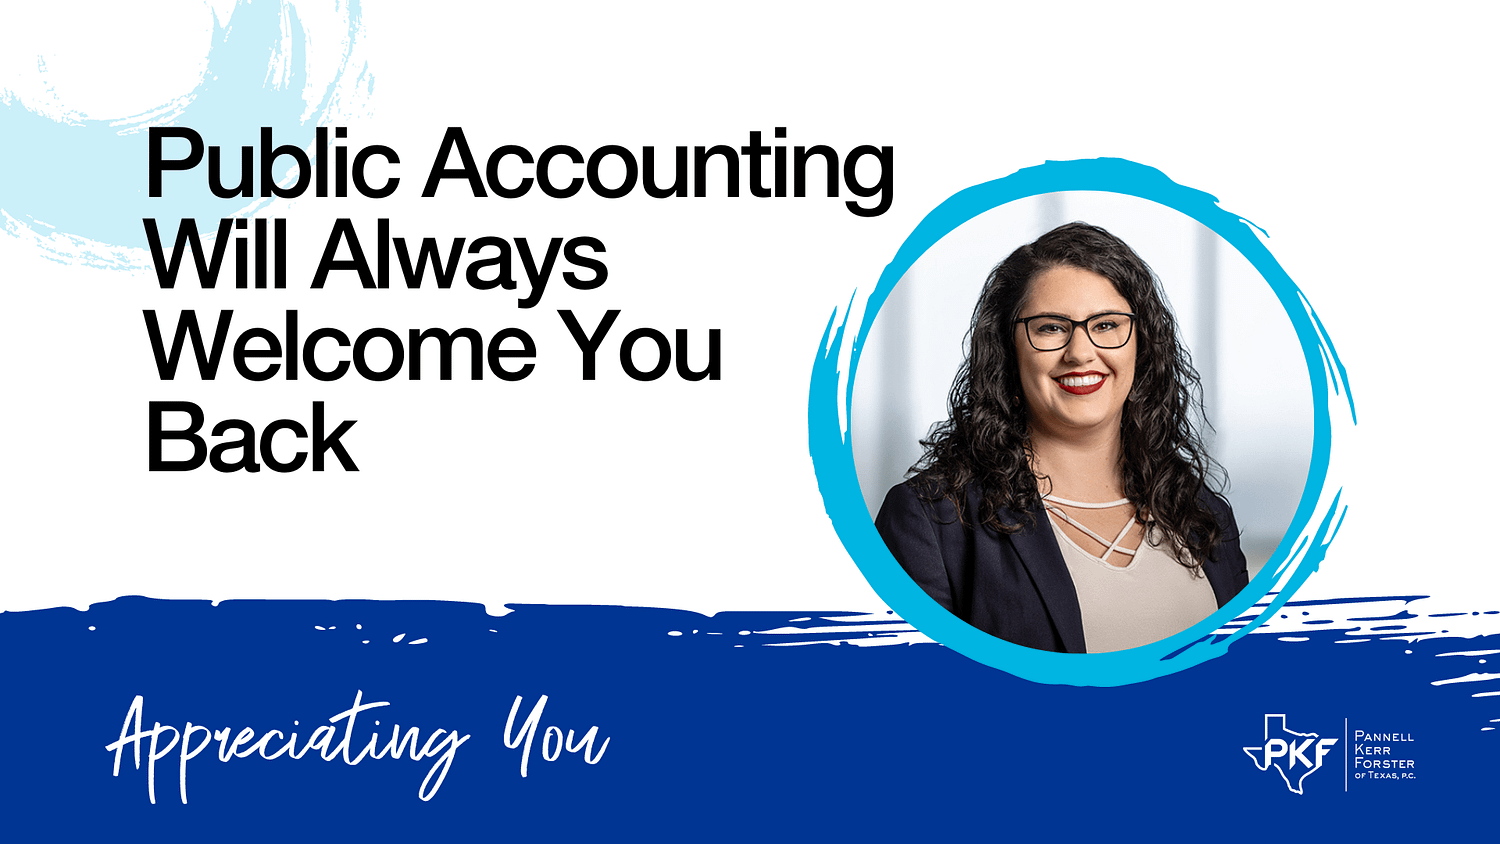 Public Accounting Will Always Welcome You Back